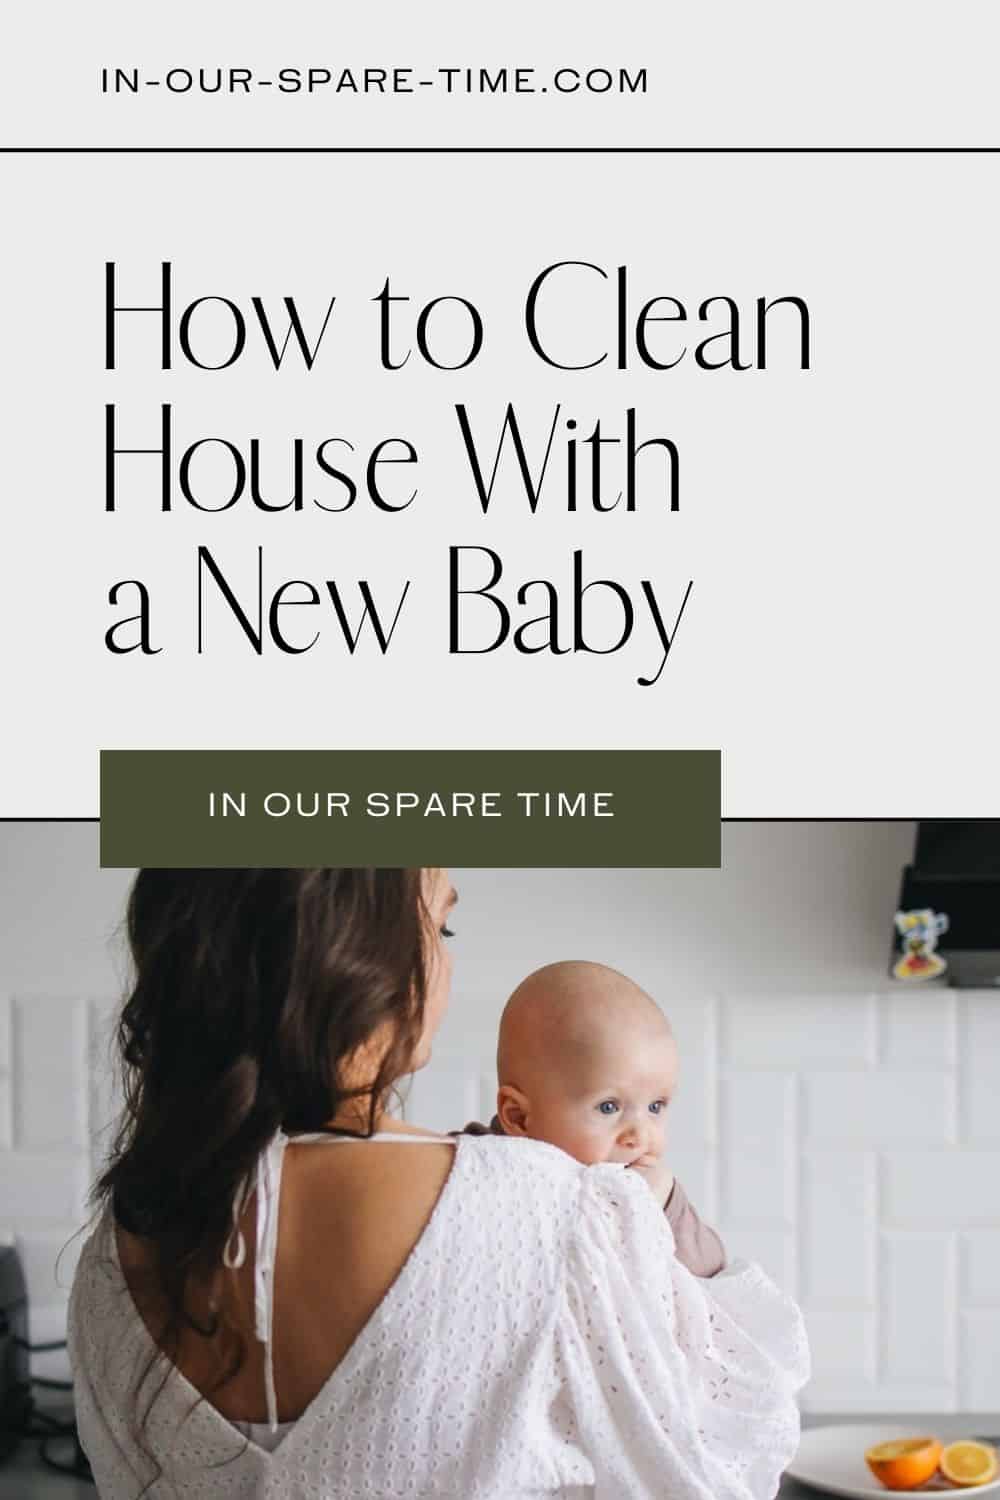 Are you wondering how to clean your house with a baby? Having a baby is stressful and takes a lot of time, but taking care of the house can also be overwhelming.